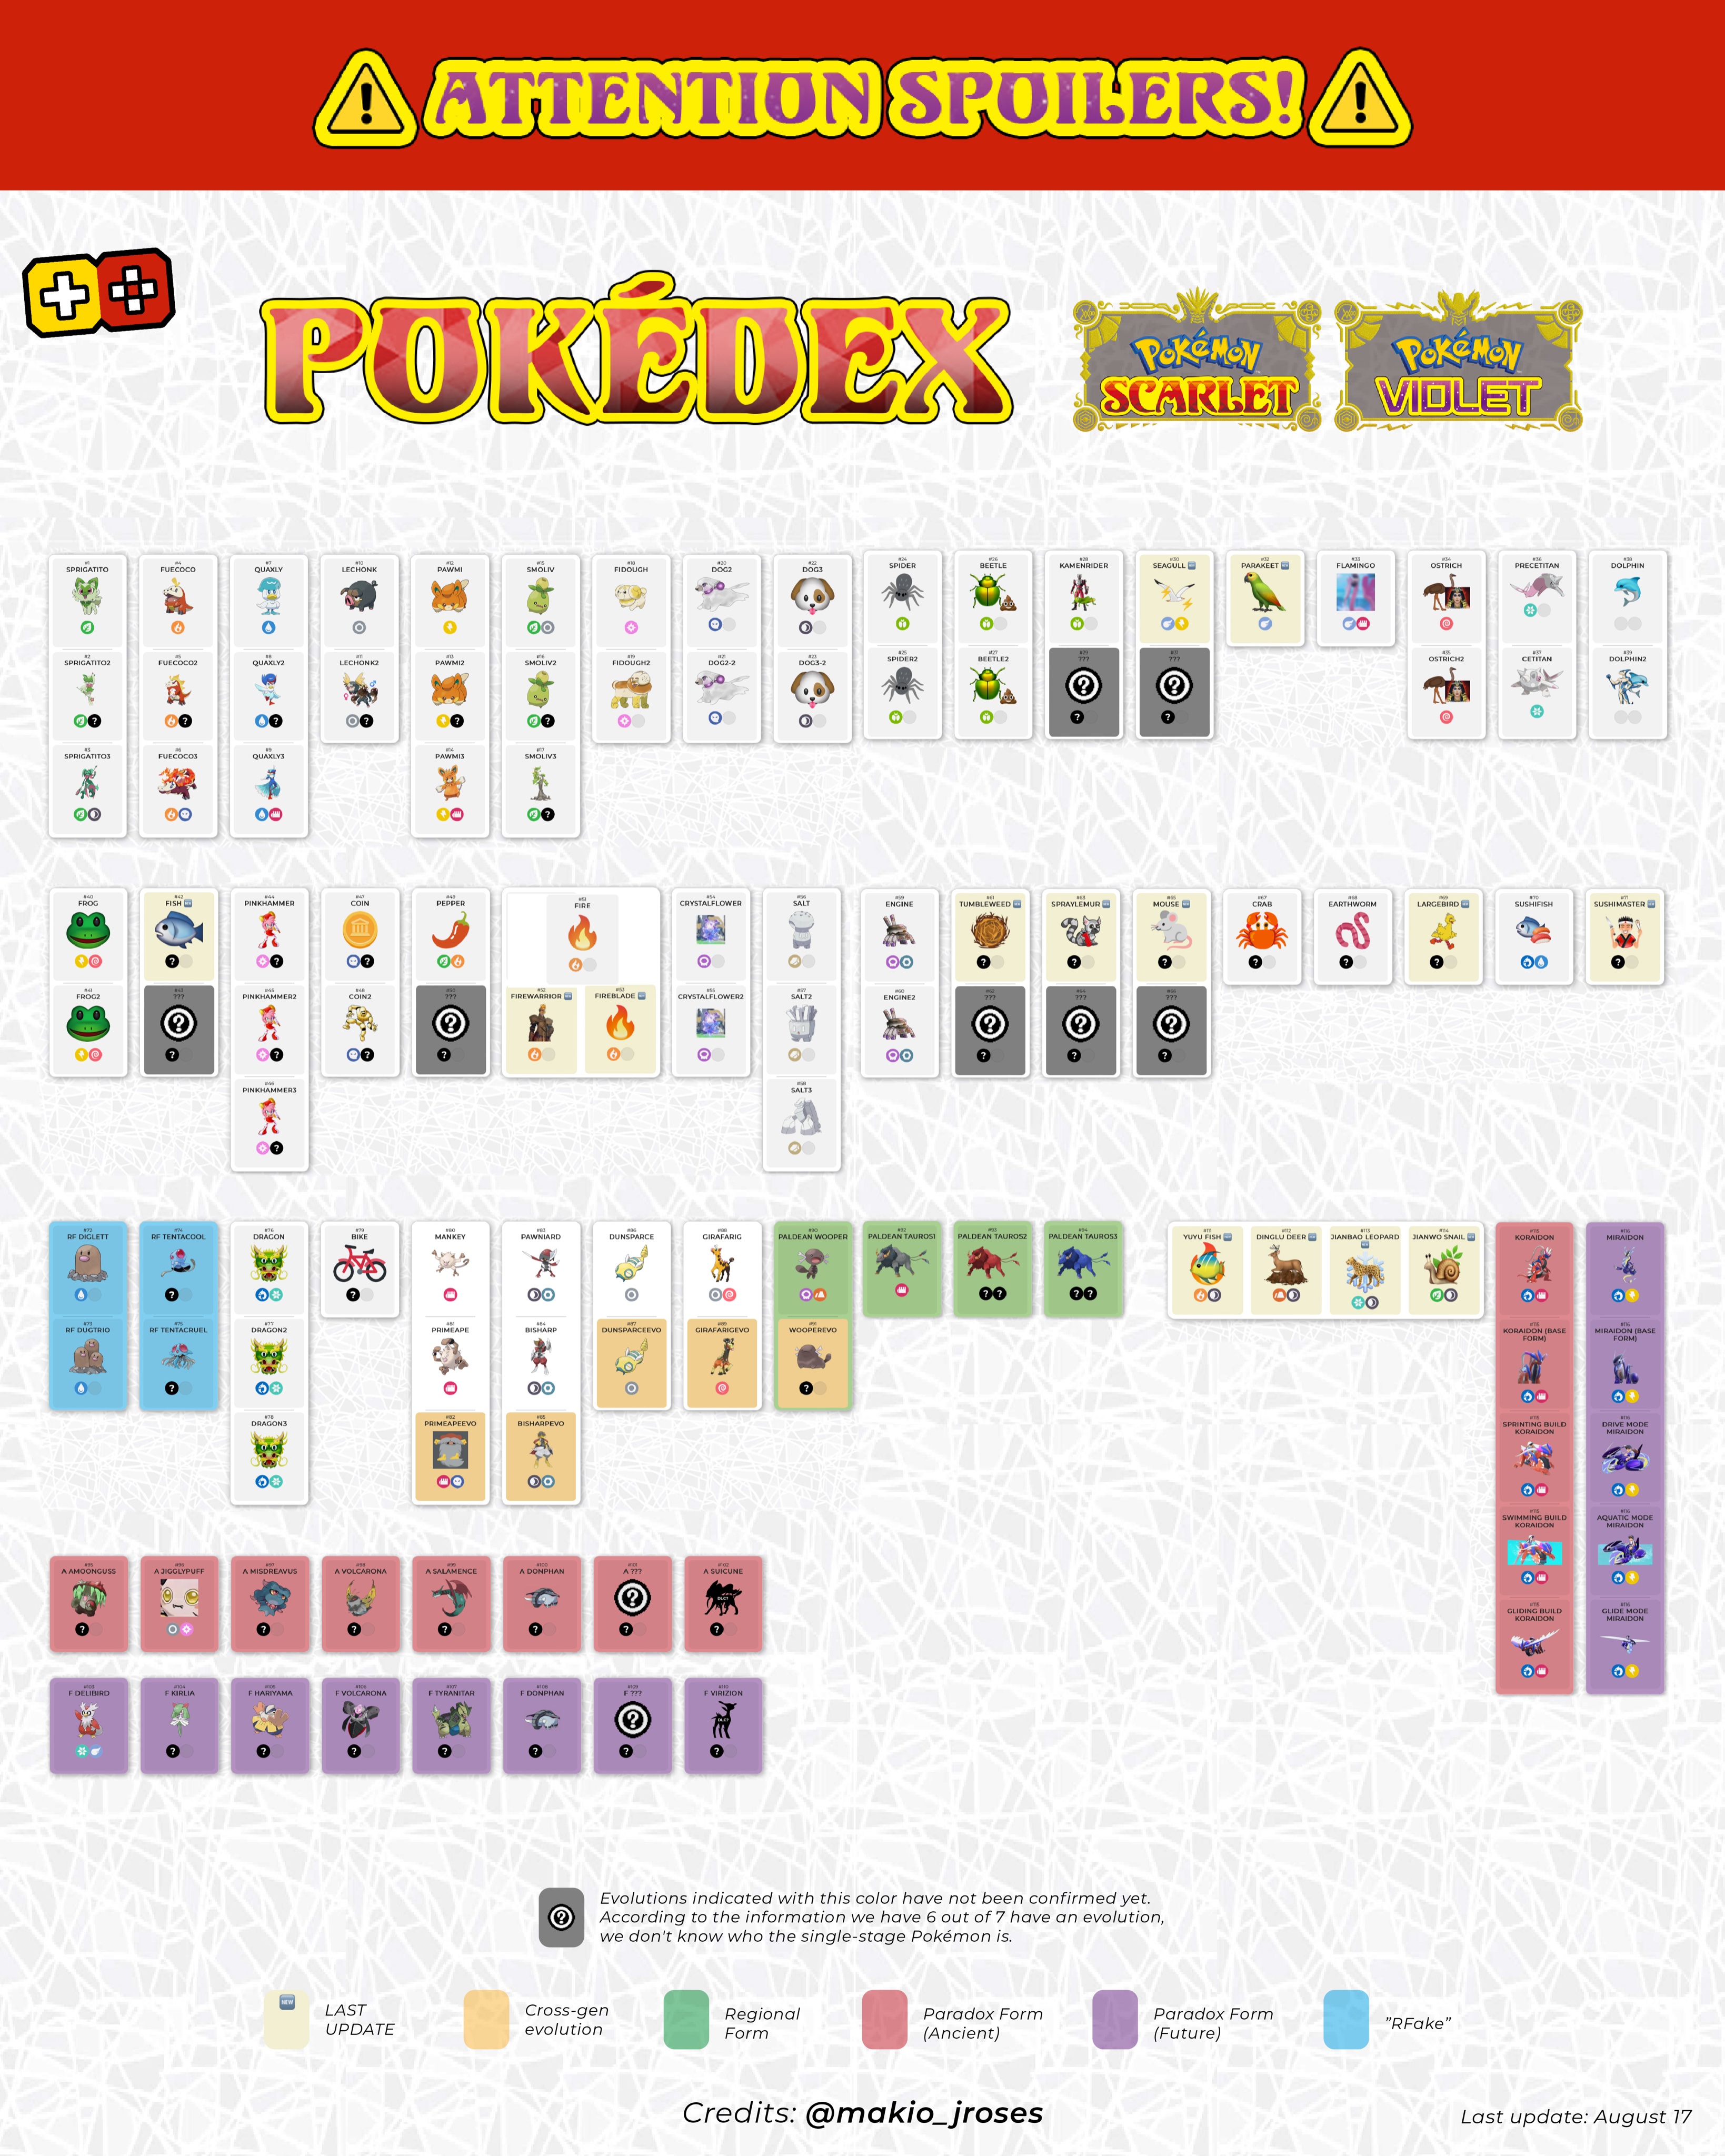 What are Paradox Forms in Pokemon Scarlet & Violet?